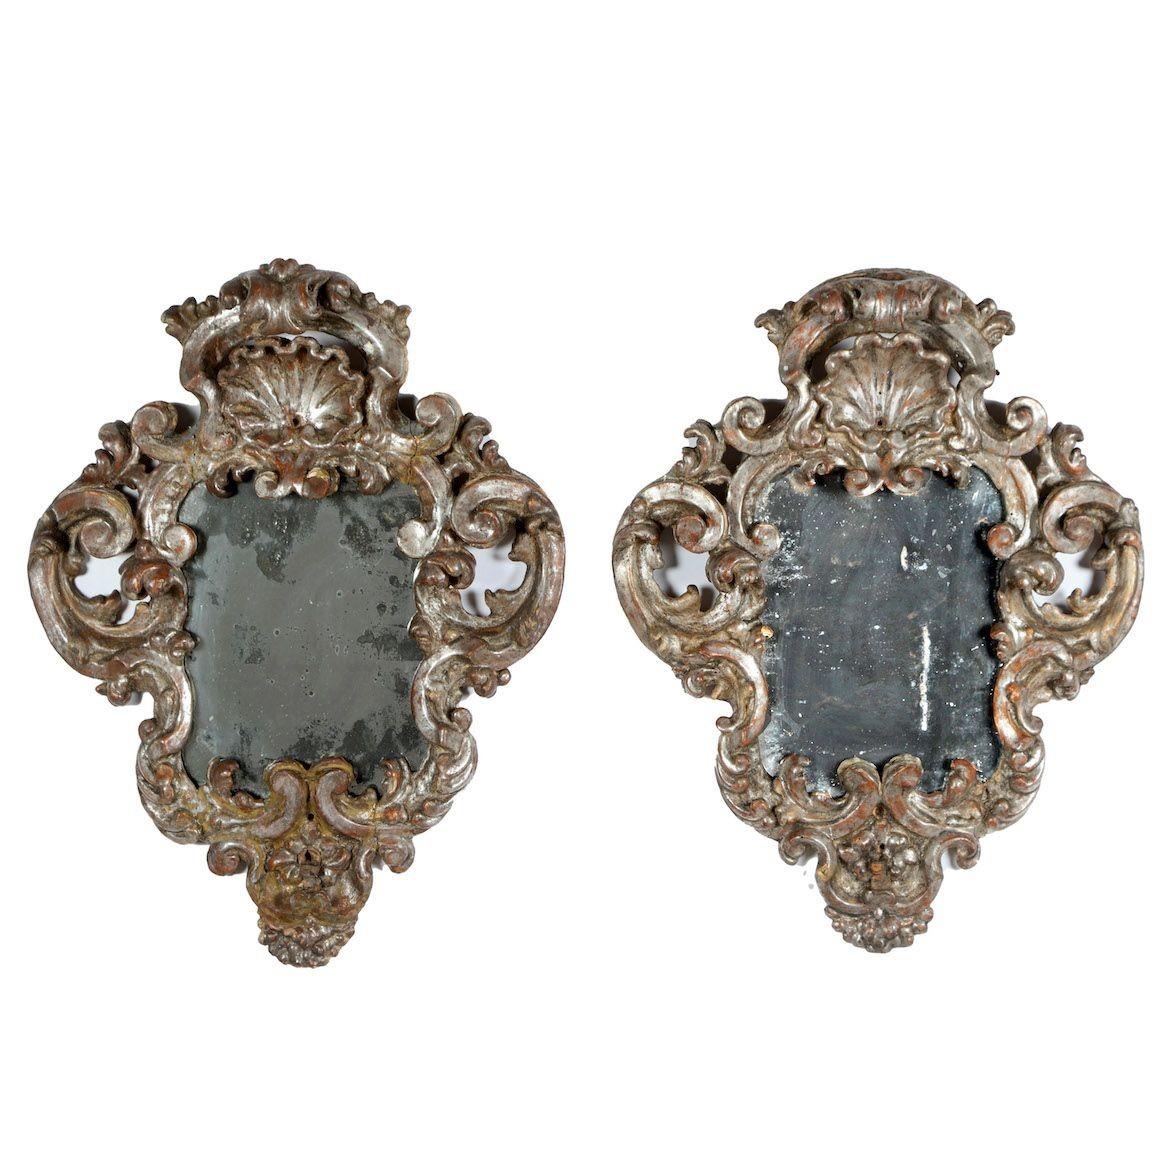 An exceptional pair of Italian Baroque mirrors with original silver leaf and mirror plates. Richly carved, raised crest in shell motif with scroll motif that extends down around each mirror.